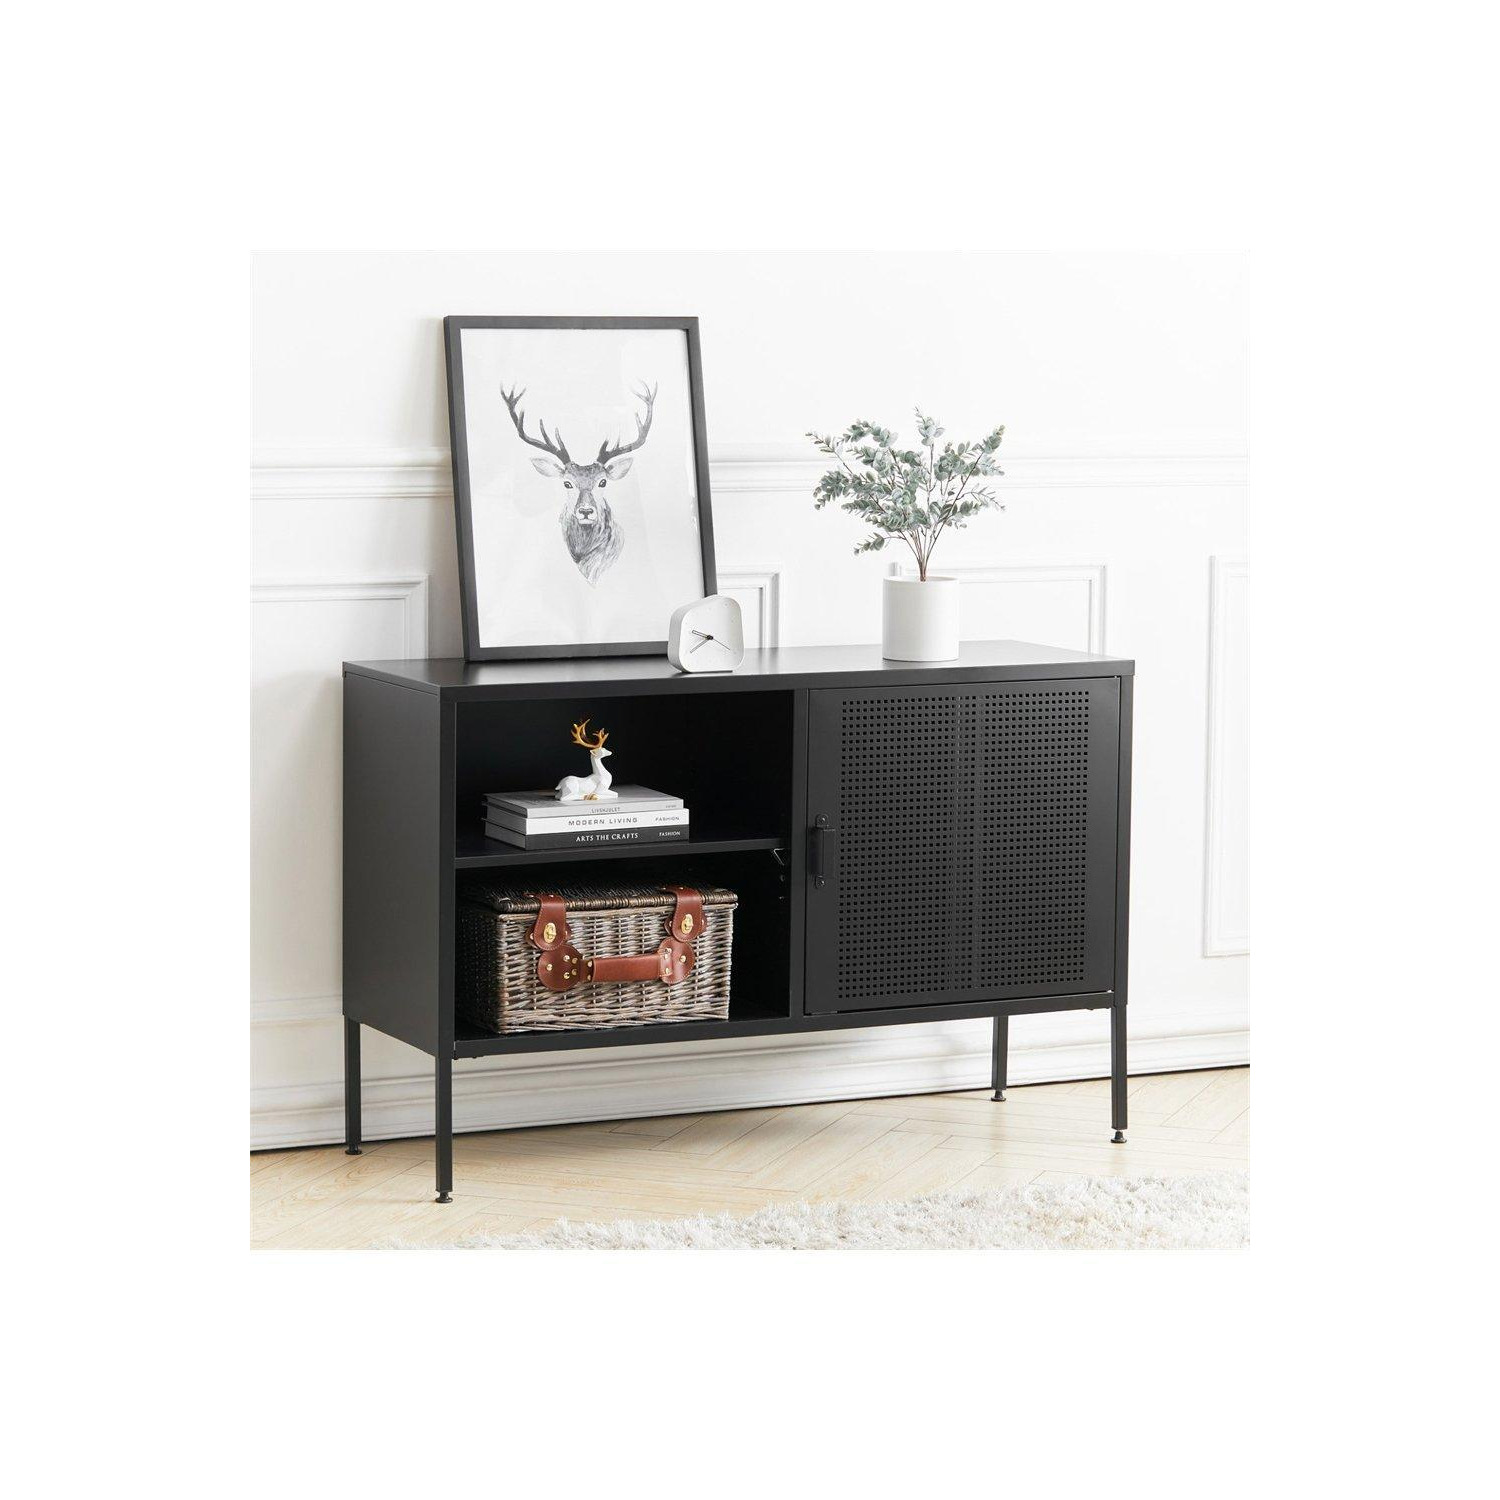 Freestanding Steel File Filing Cabinet with Open Shelves Industrial Style TV Stand Storage Cabinet - image 1